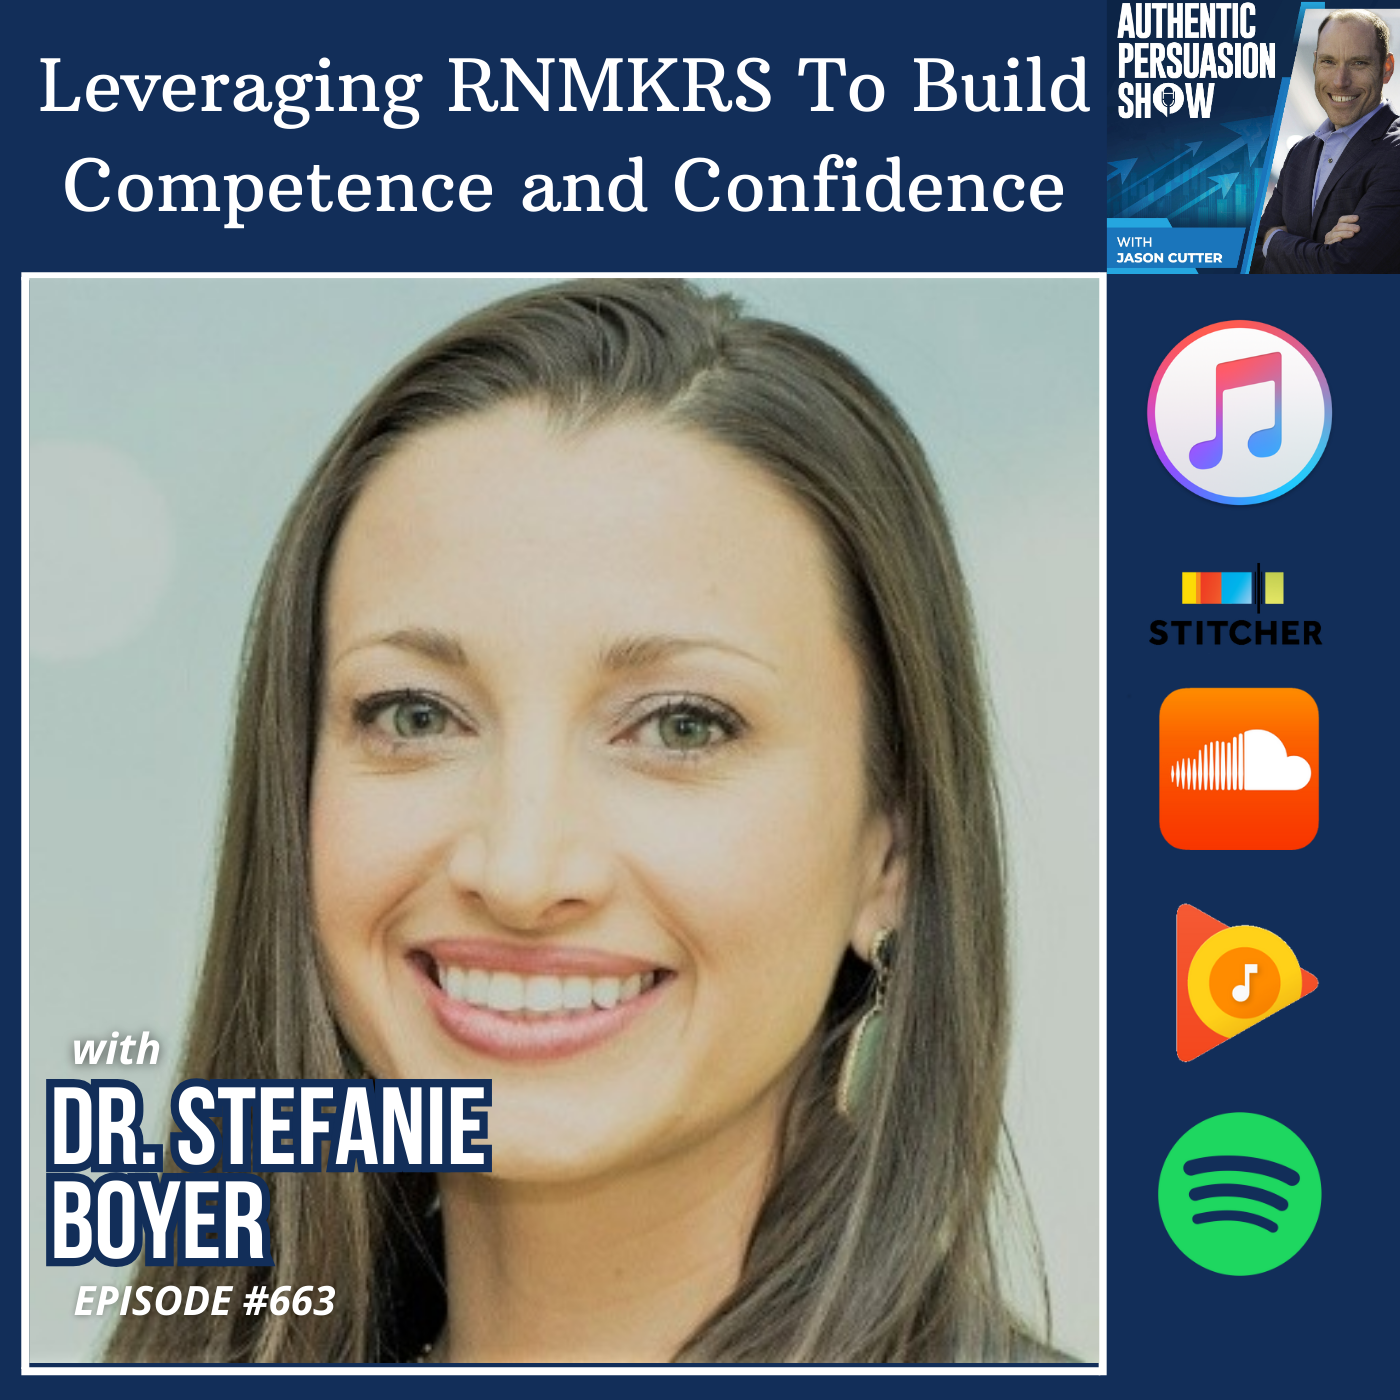 [663] Leveraging RNMKRS To Build Competence and Confidence, with Dr. Stefanie Boyer from Bryant University